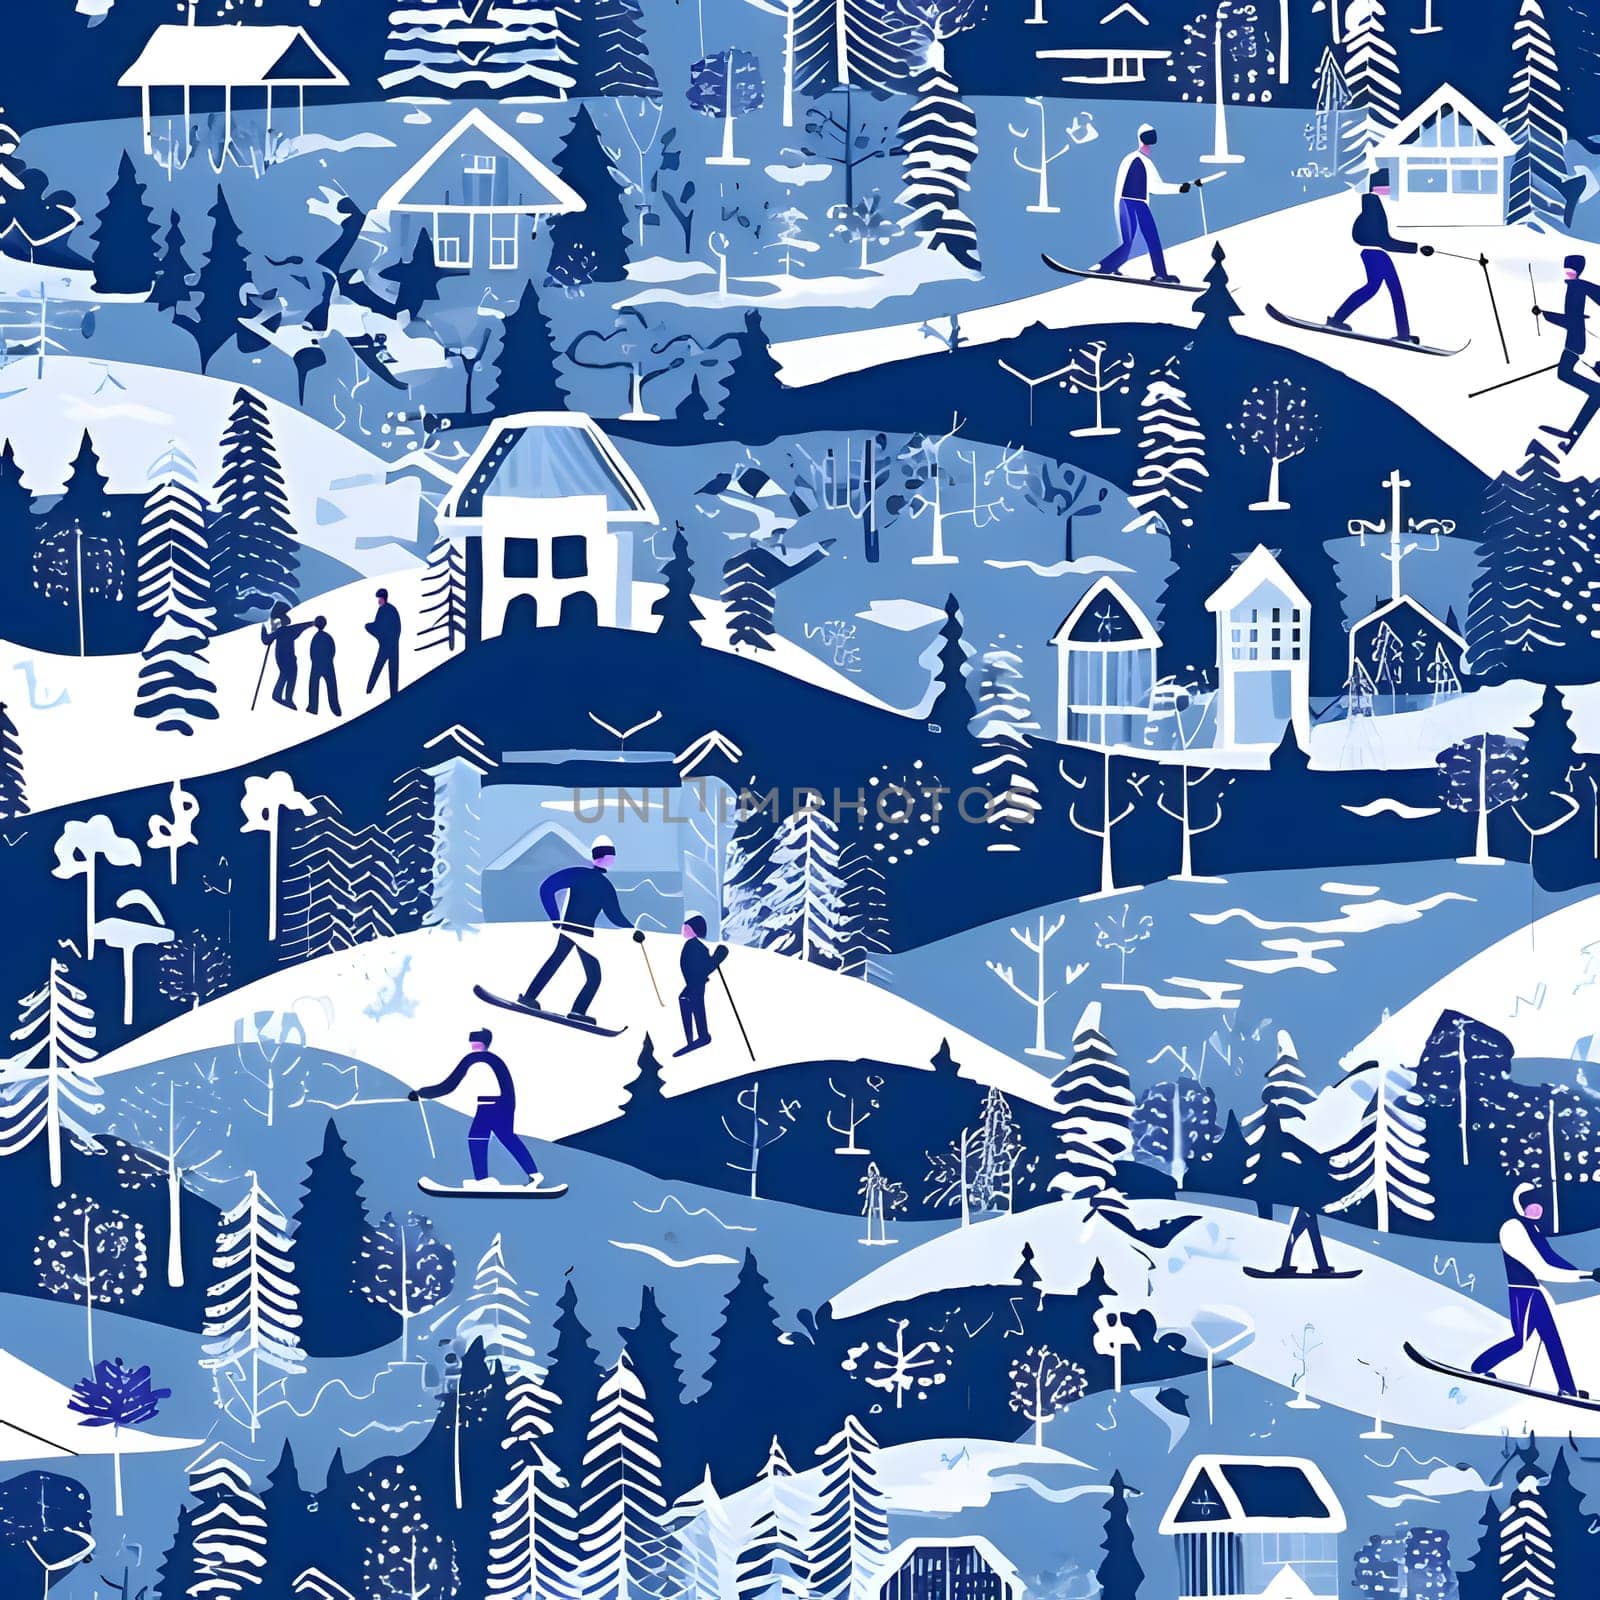 Patterns and banners backgrounds: Winter landscape with people skiing. Seamless pattern. Vector illustration.